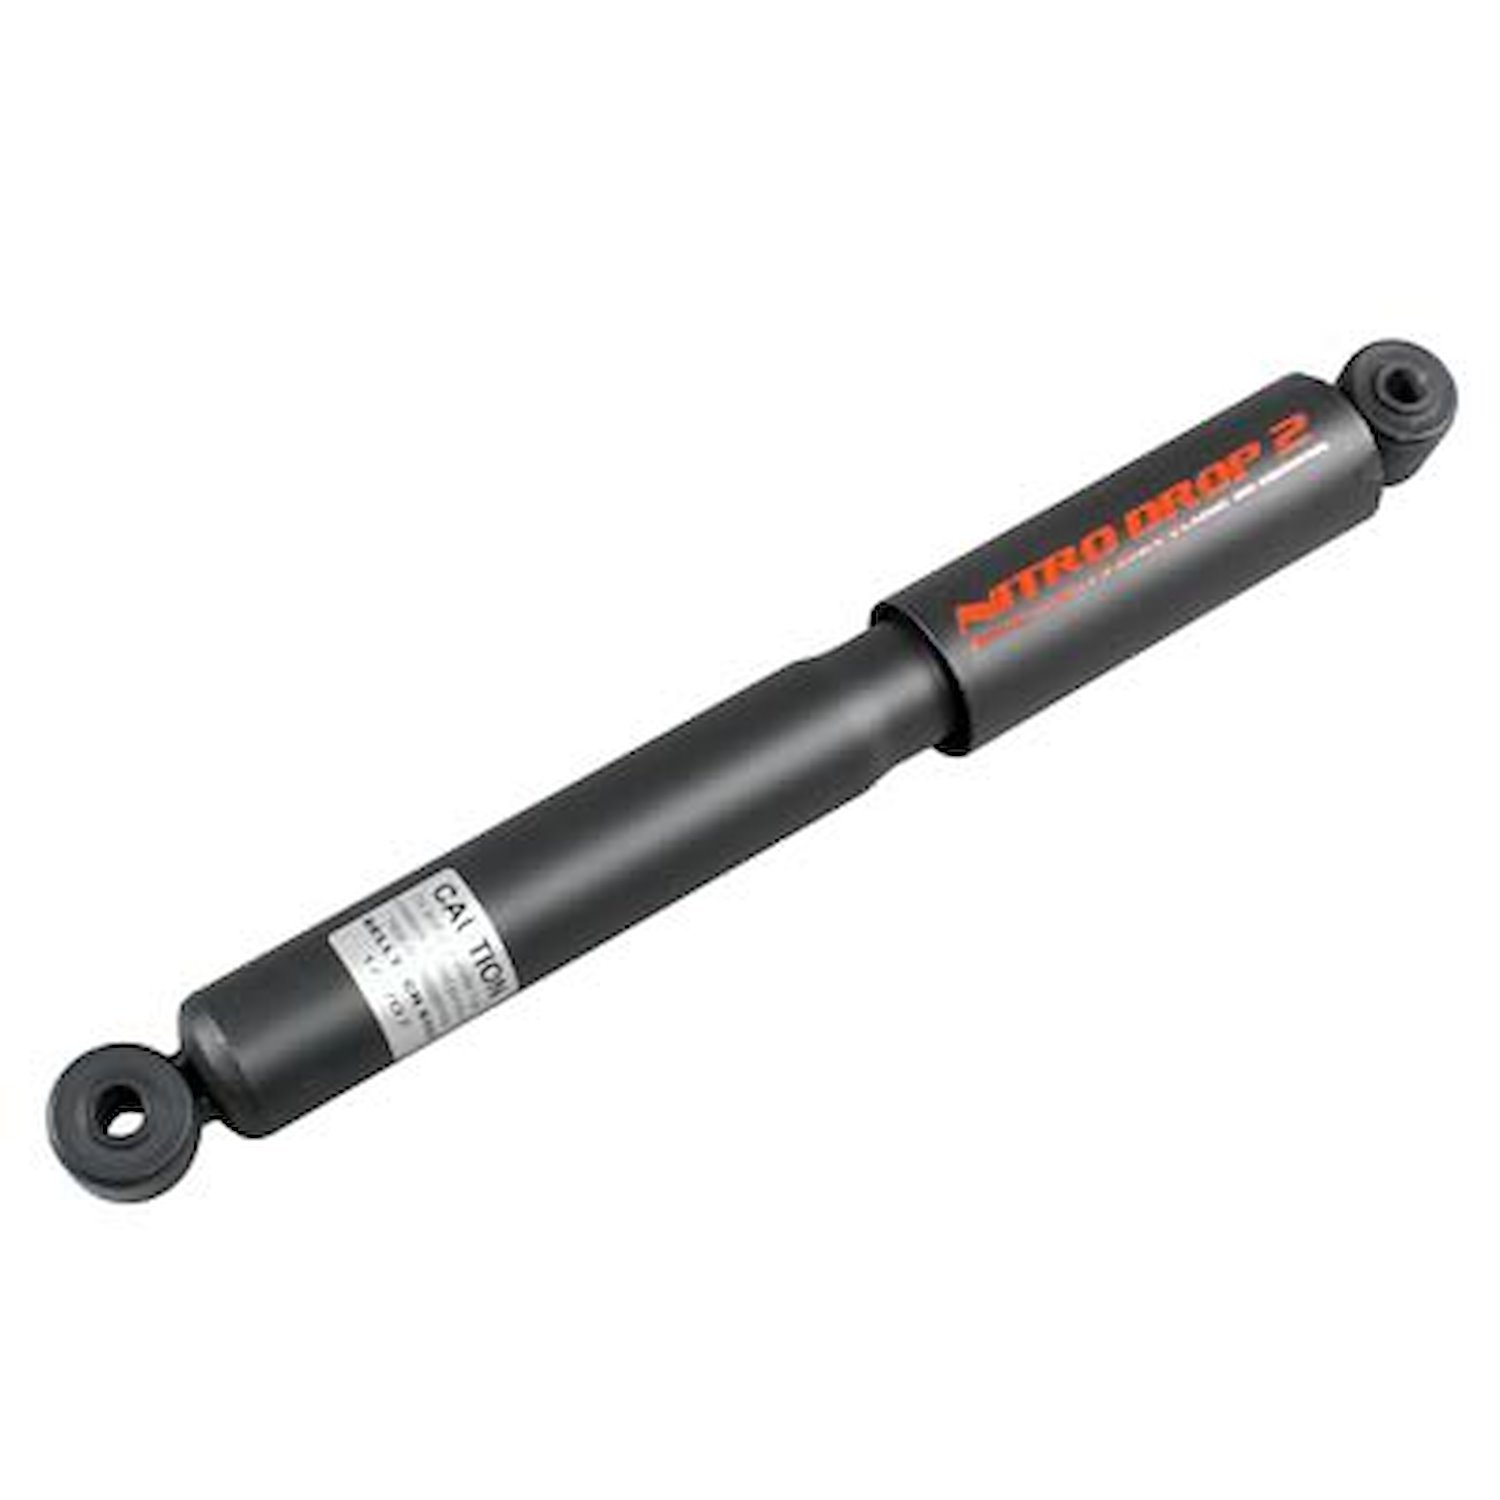 Street Performance Shock includes (1) 146-10103B Front Shock